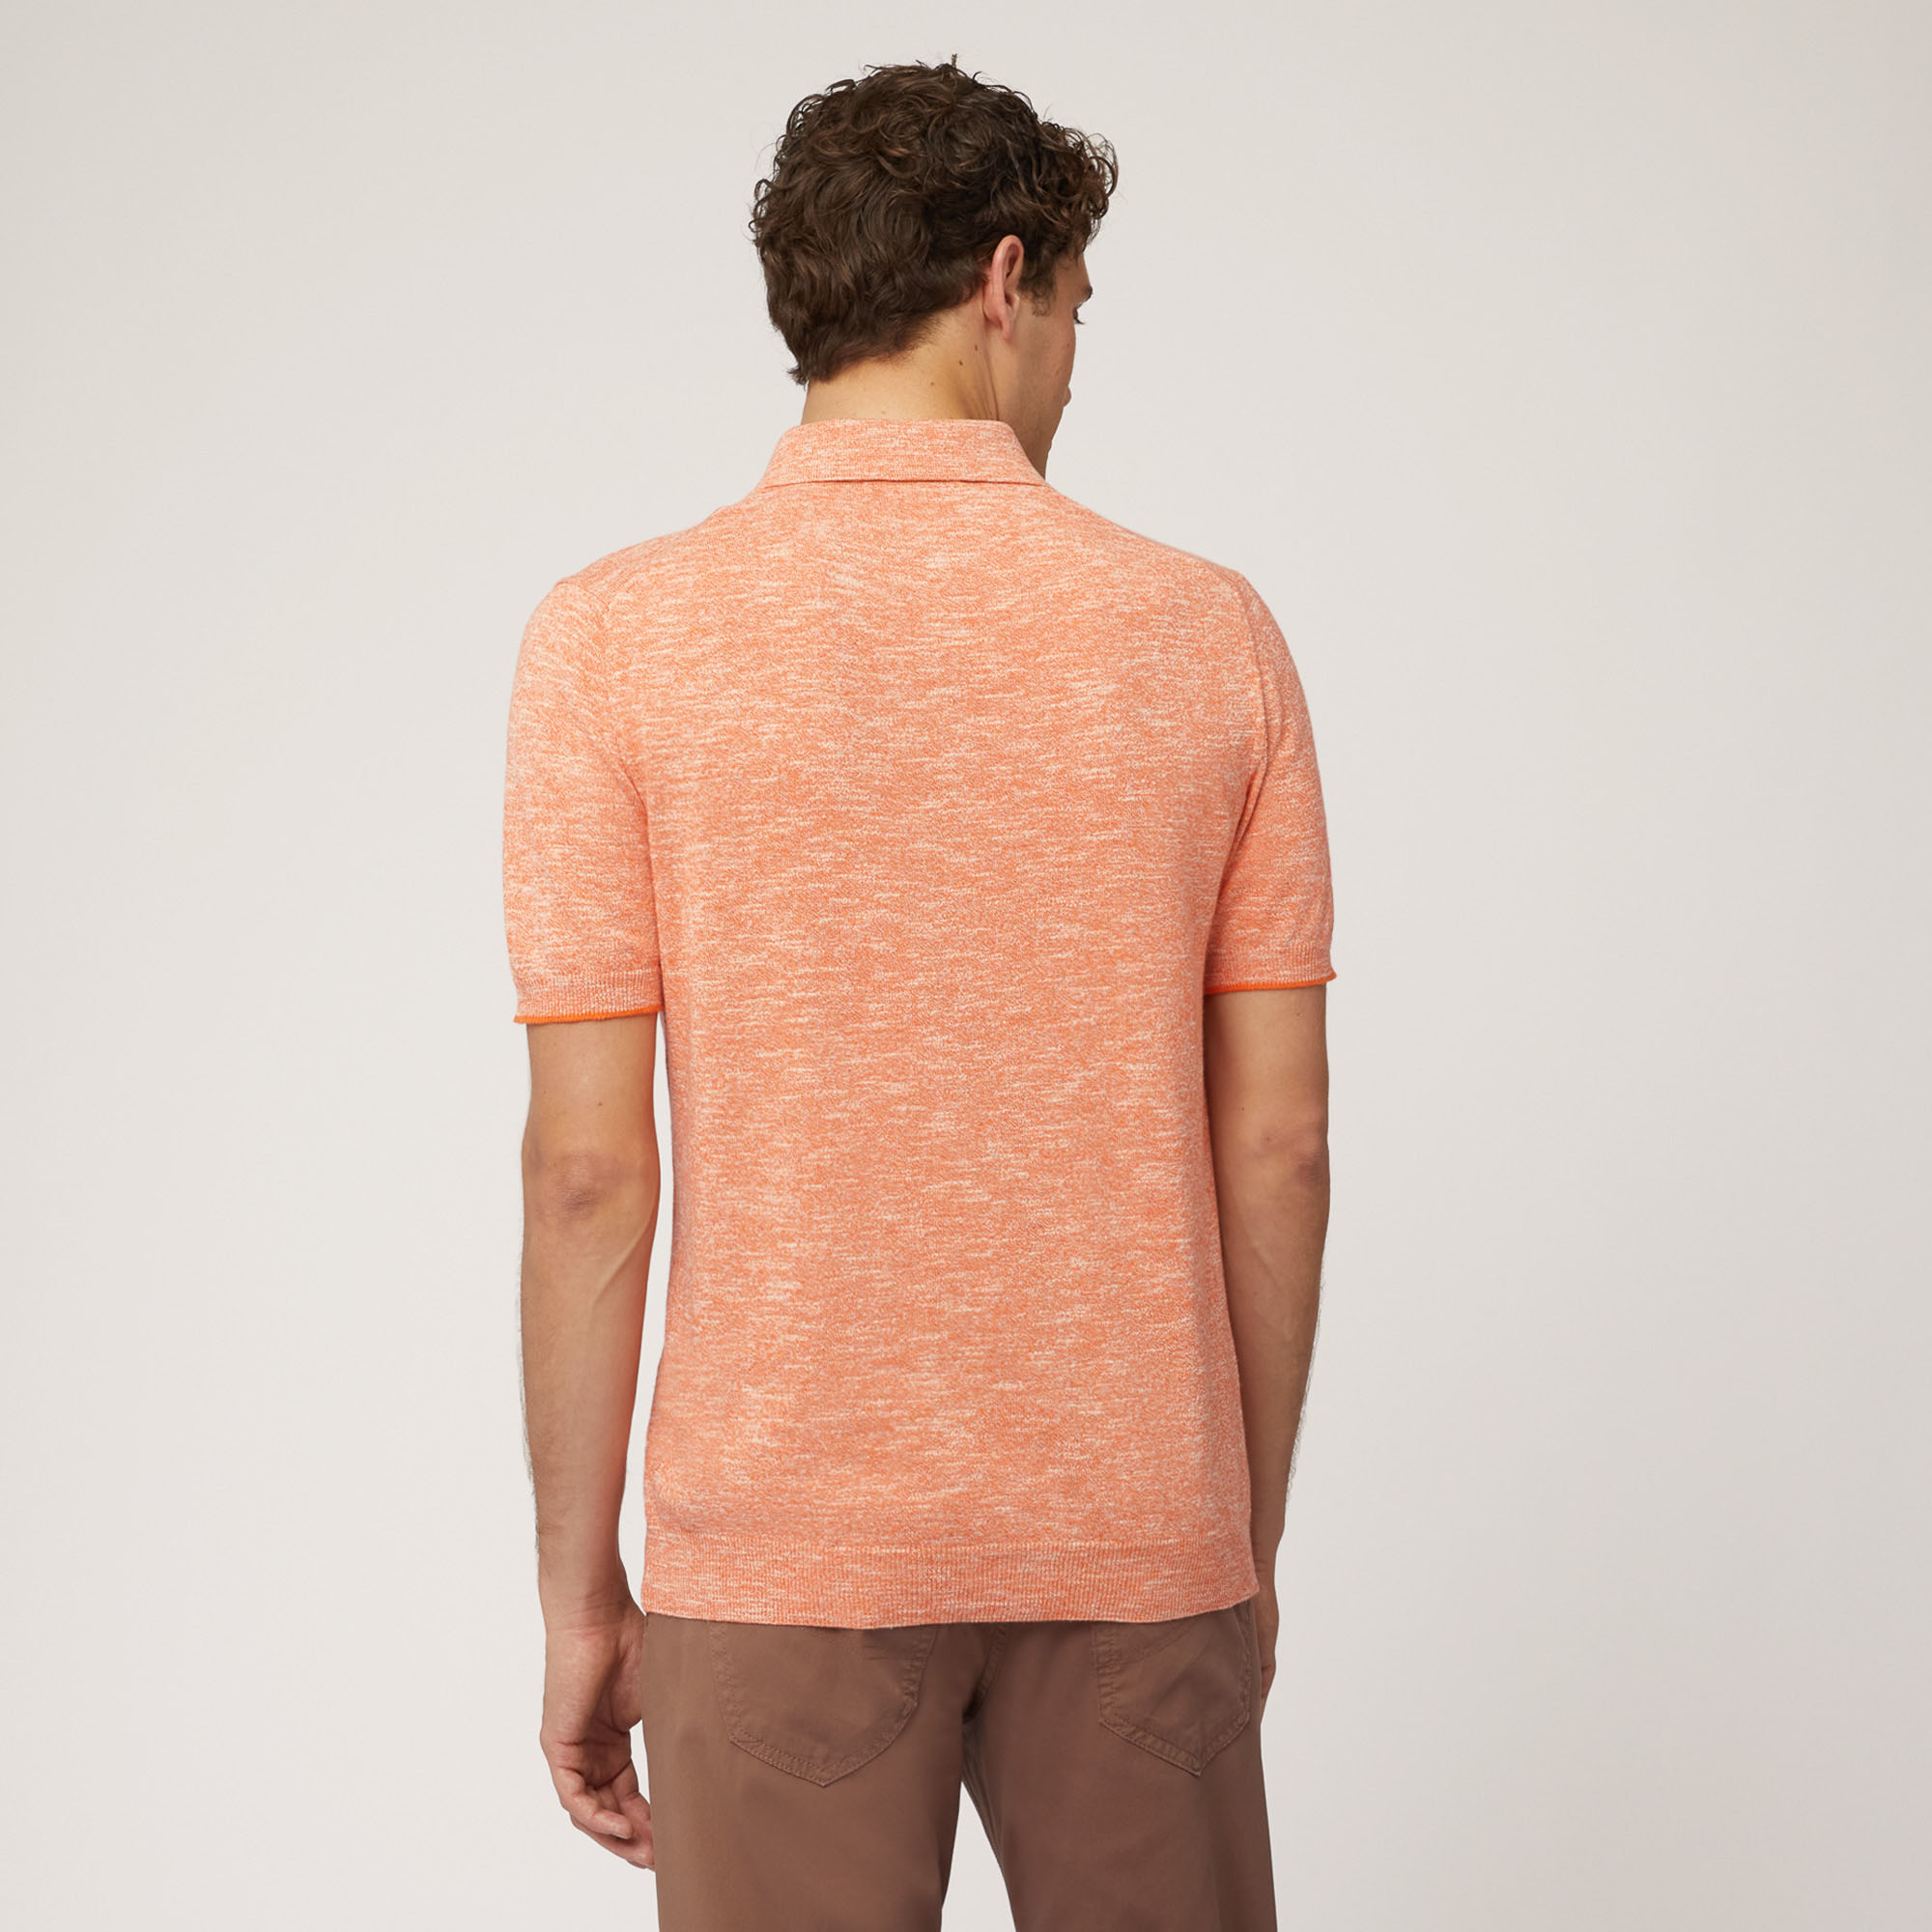 Cotton and Linen Tweed Polo, Orange, large image number 1